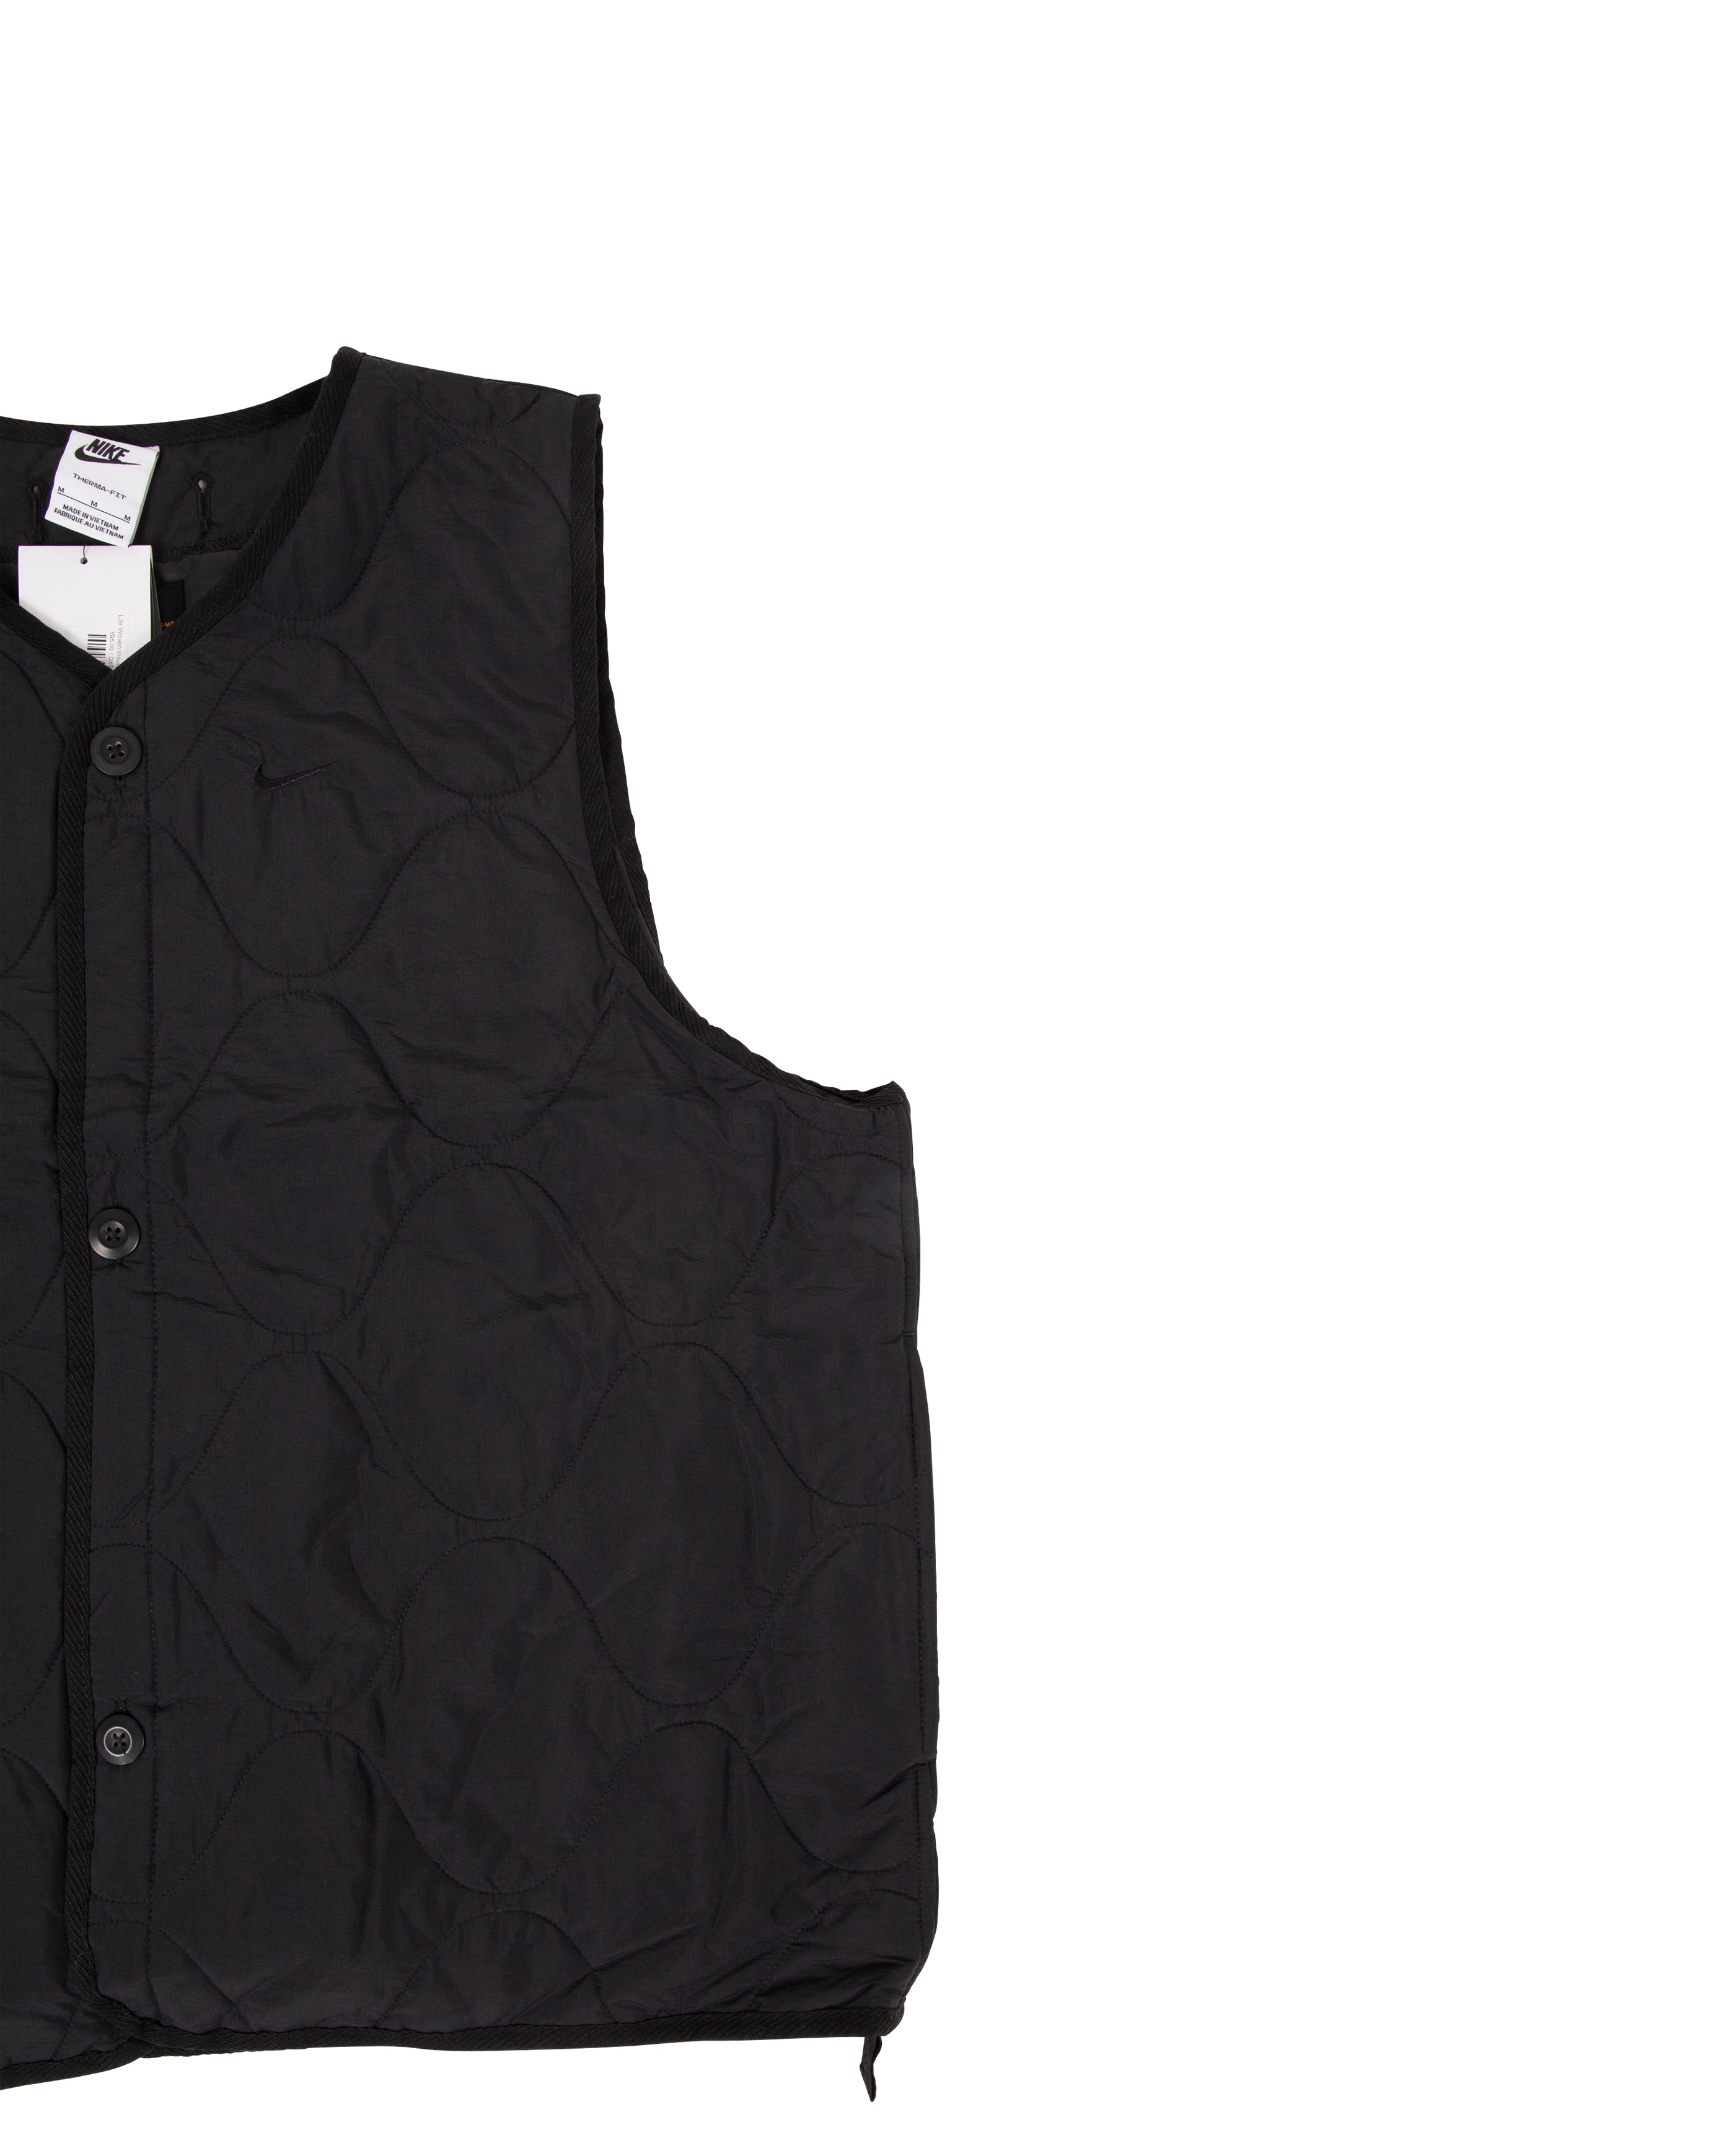 Nike Life Woven Insulated Military Vest » Buy online now!